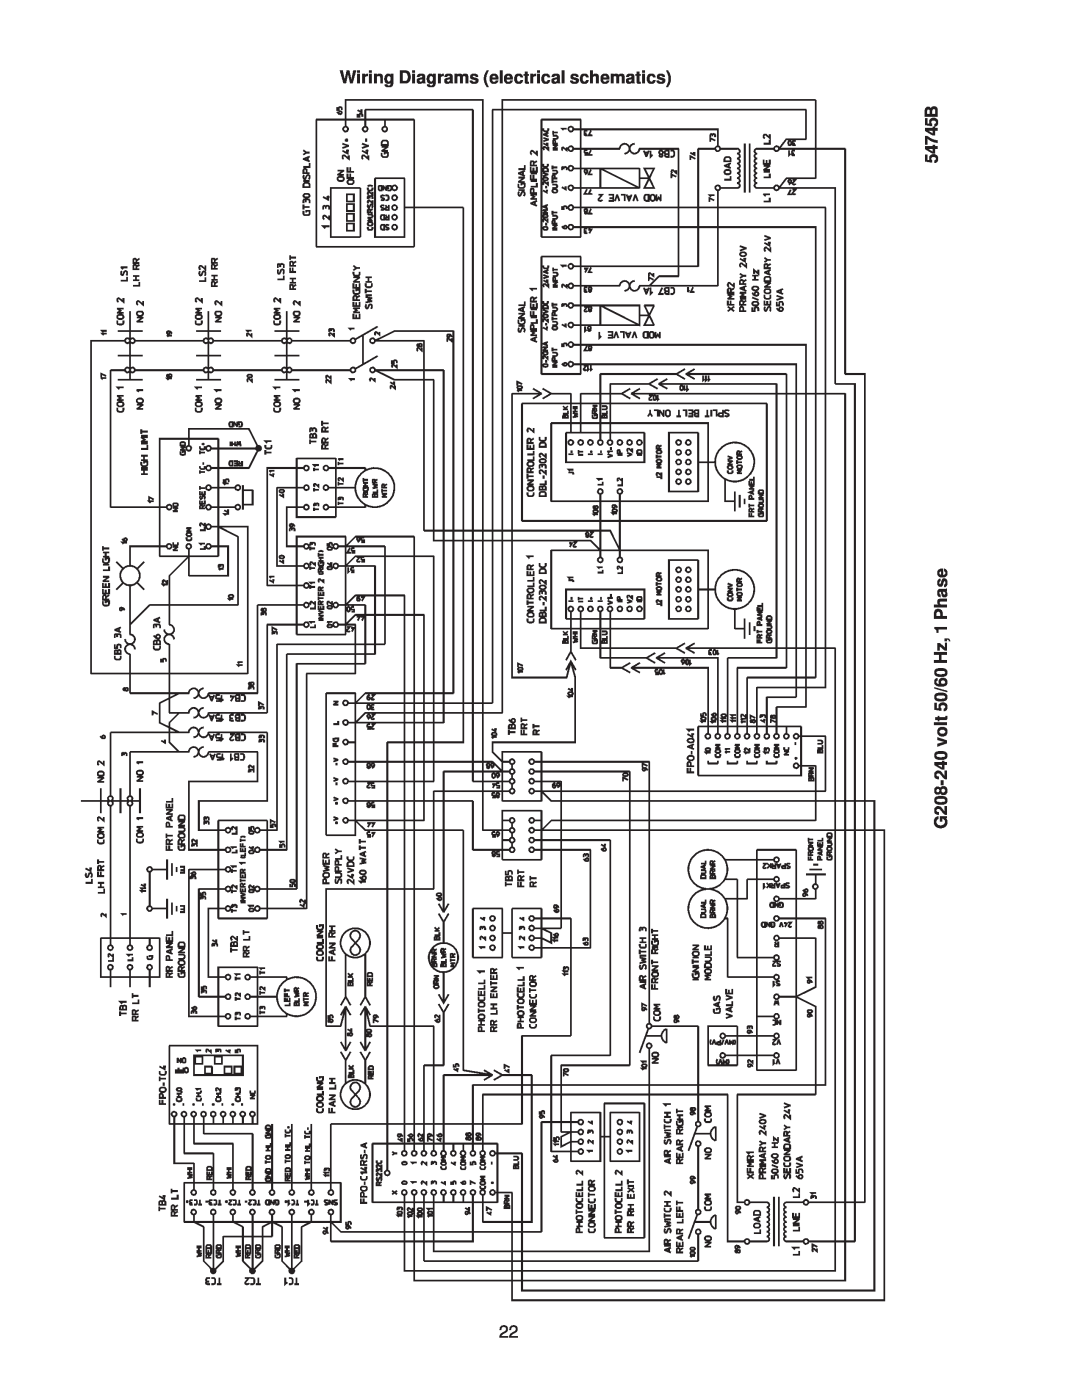 Middleby Marshall PS670 installation manual Wiring Diagrams electrical schematics 54745B, G208-240volt 50/60 Hz, 1 Phase 